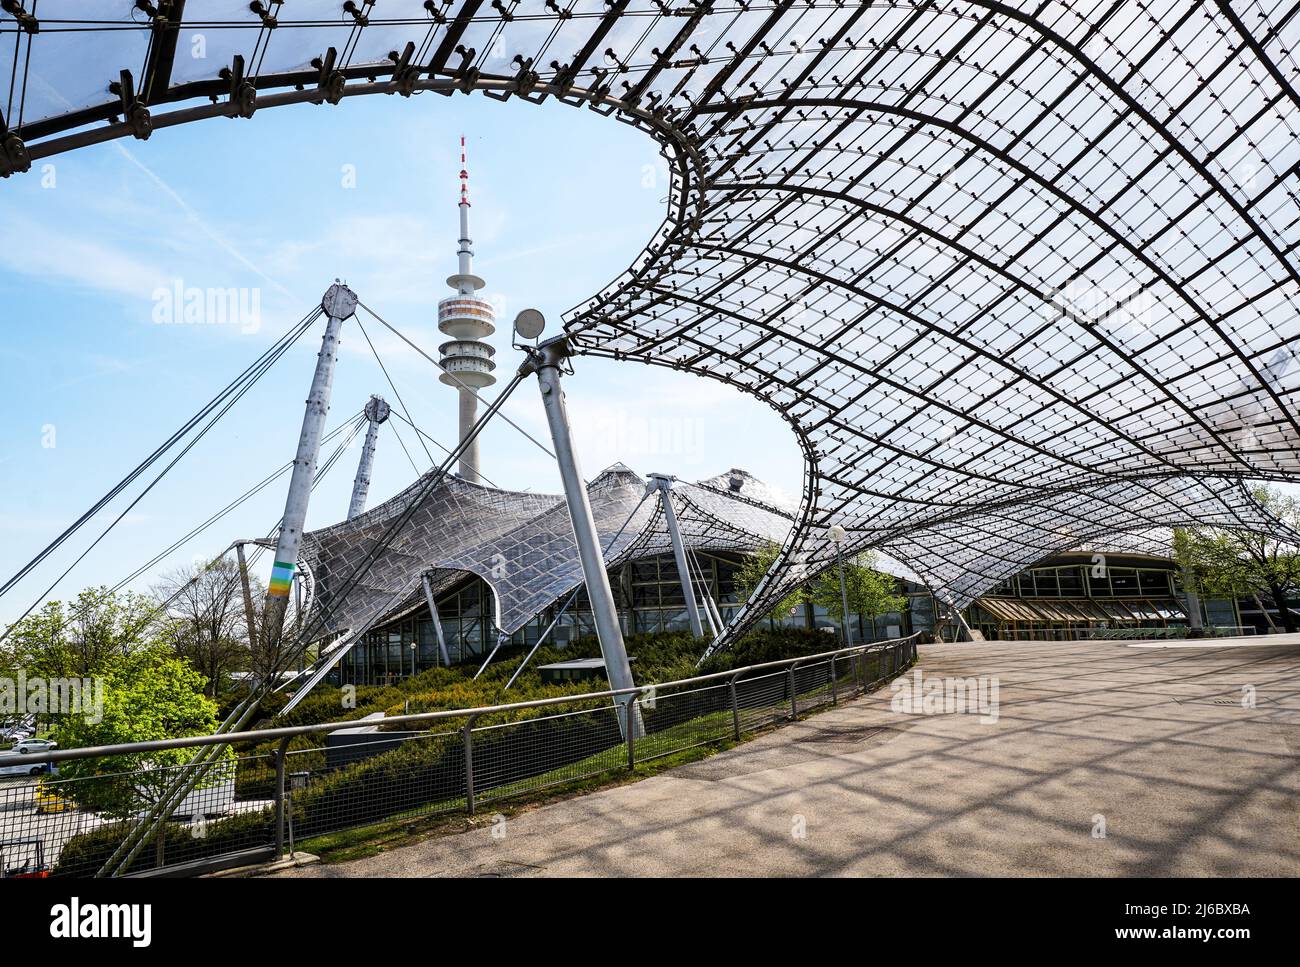 The famous roof of the Munich Olympic stadium designed by Behnisch and Frei Otto – Olympiapark und olympische Sportstätten in München Stock Photo